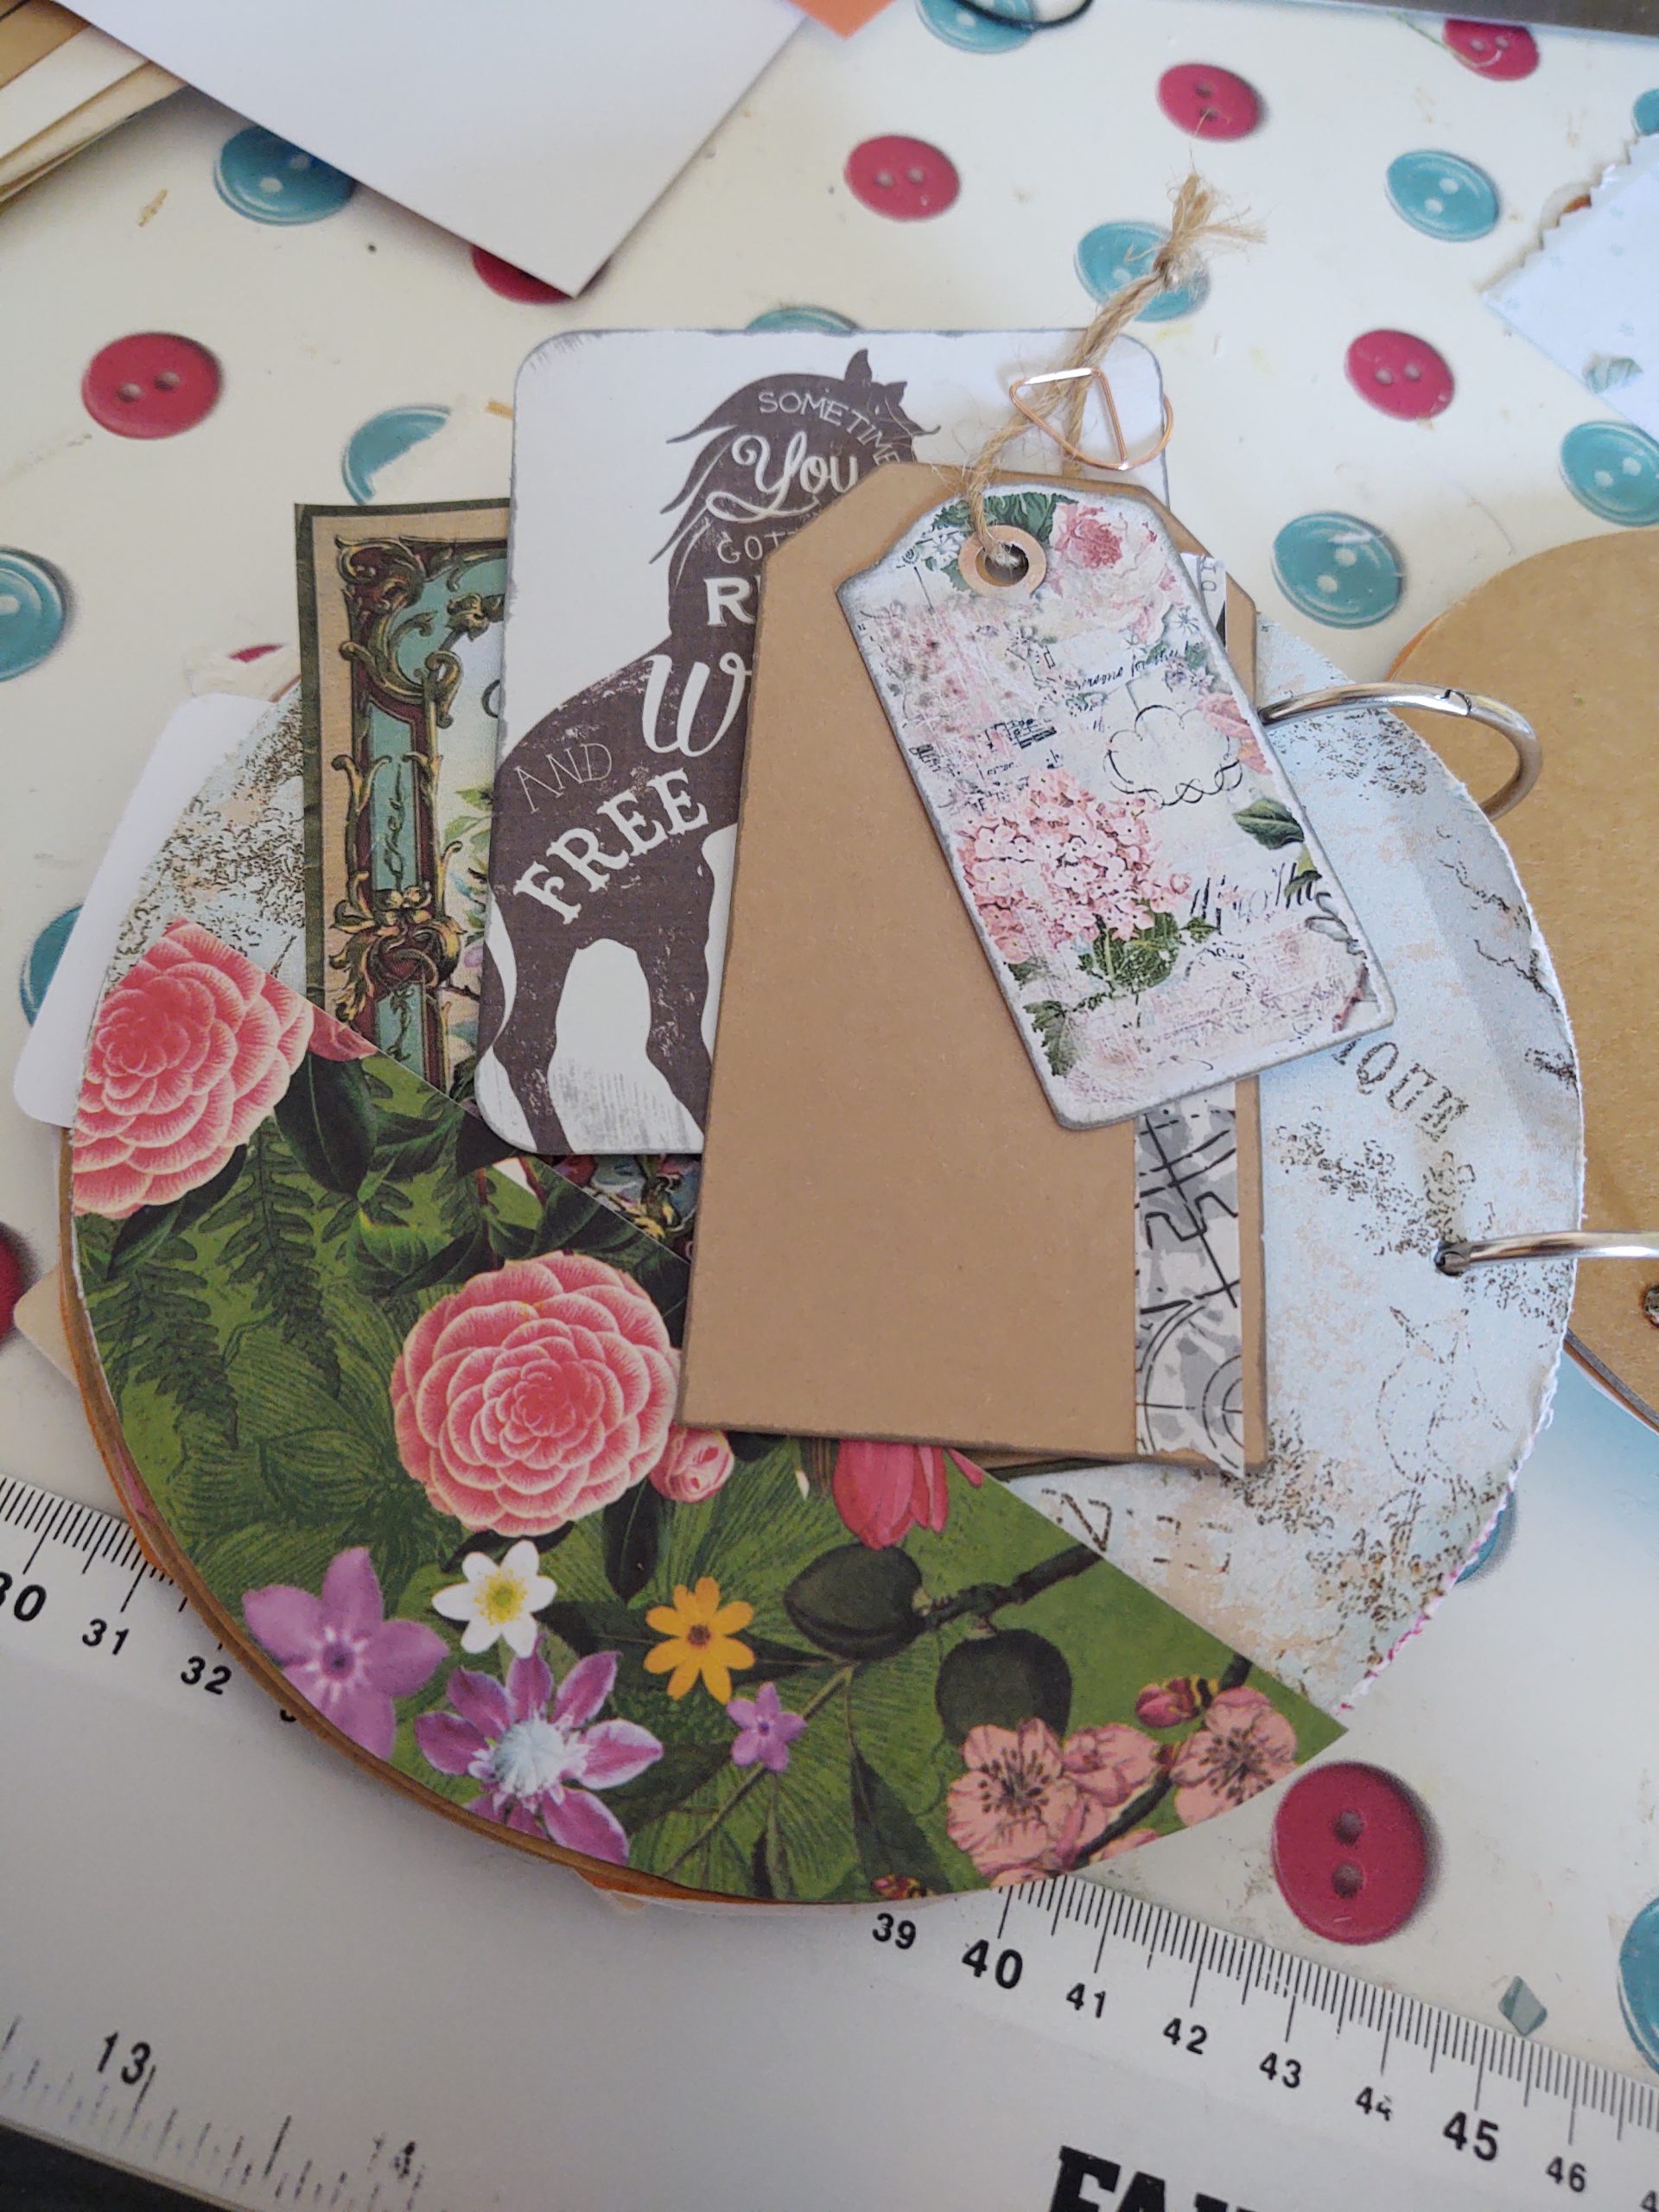 A junk journal page – flowers and unicorns and vintage look ephemera